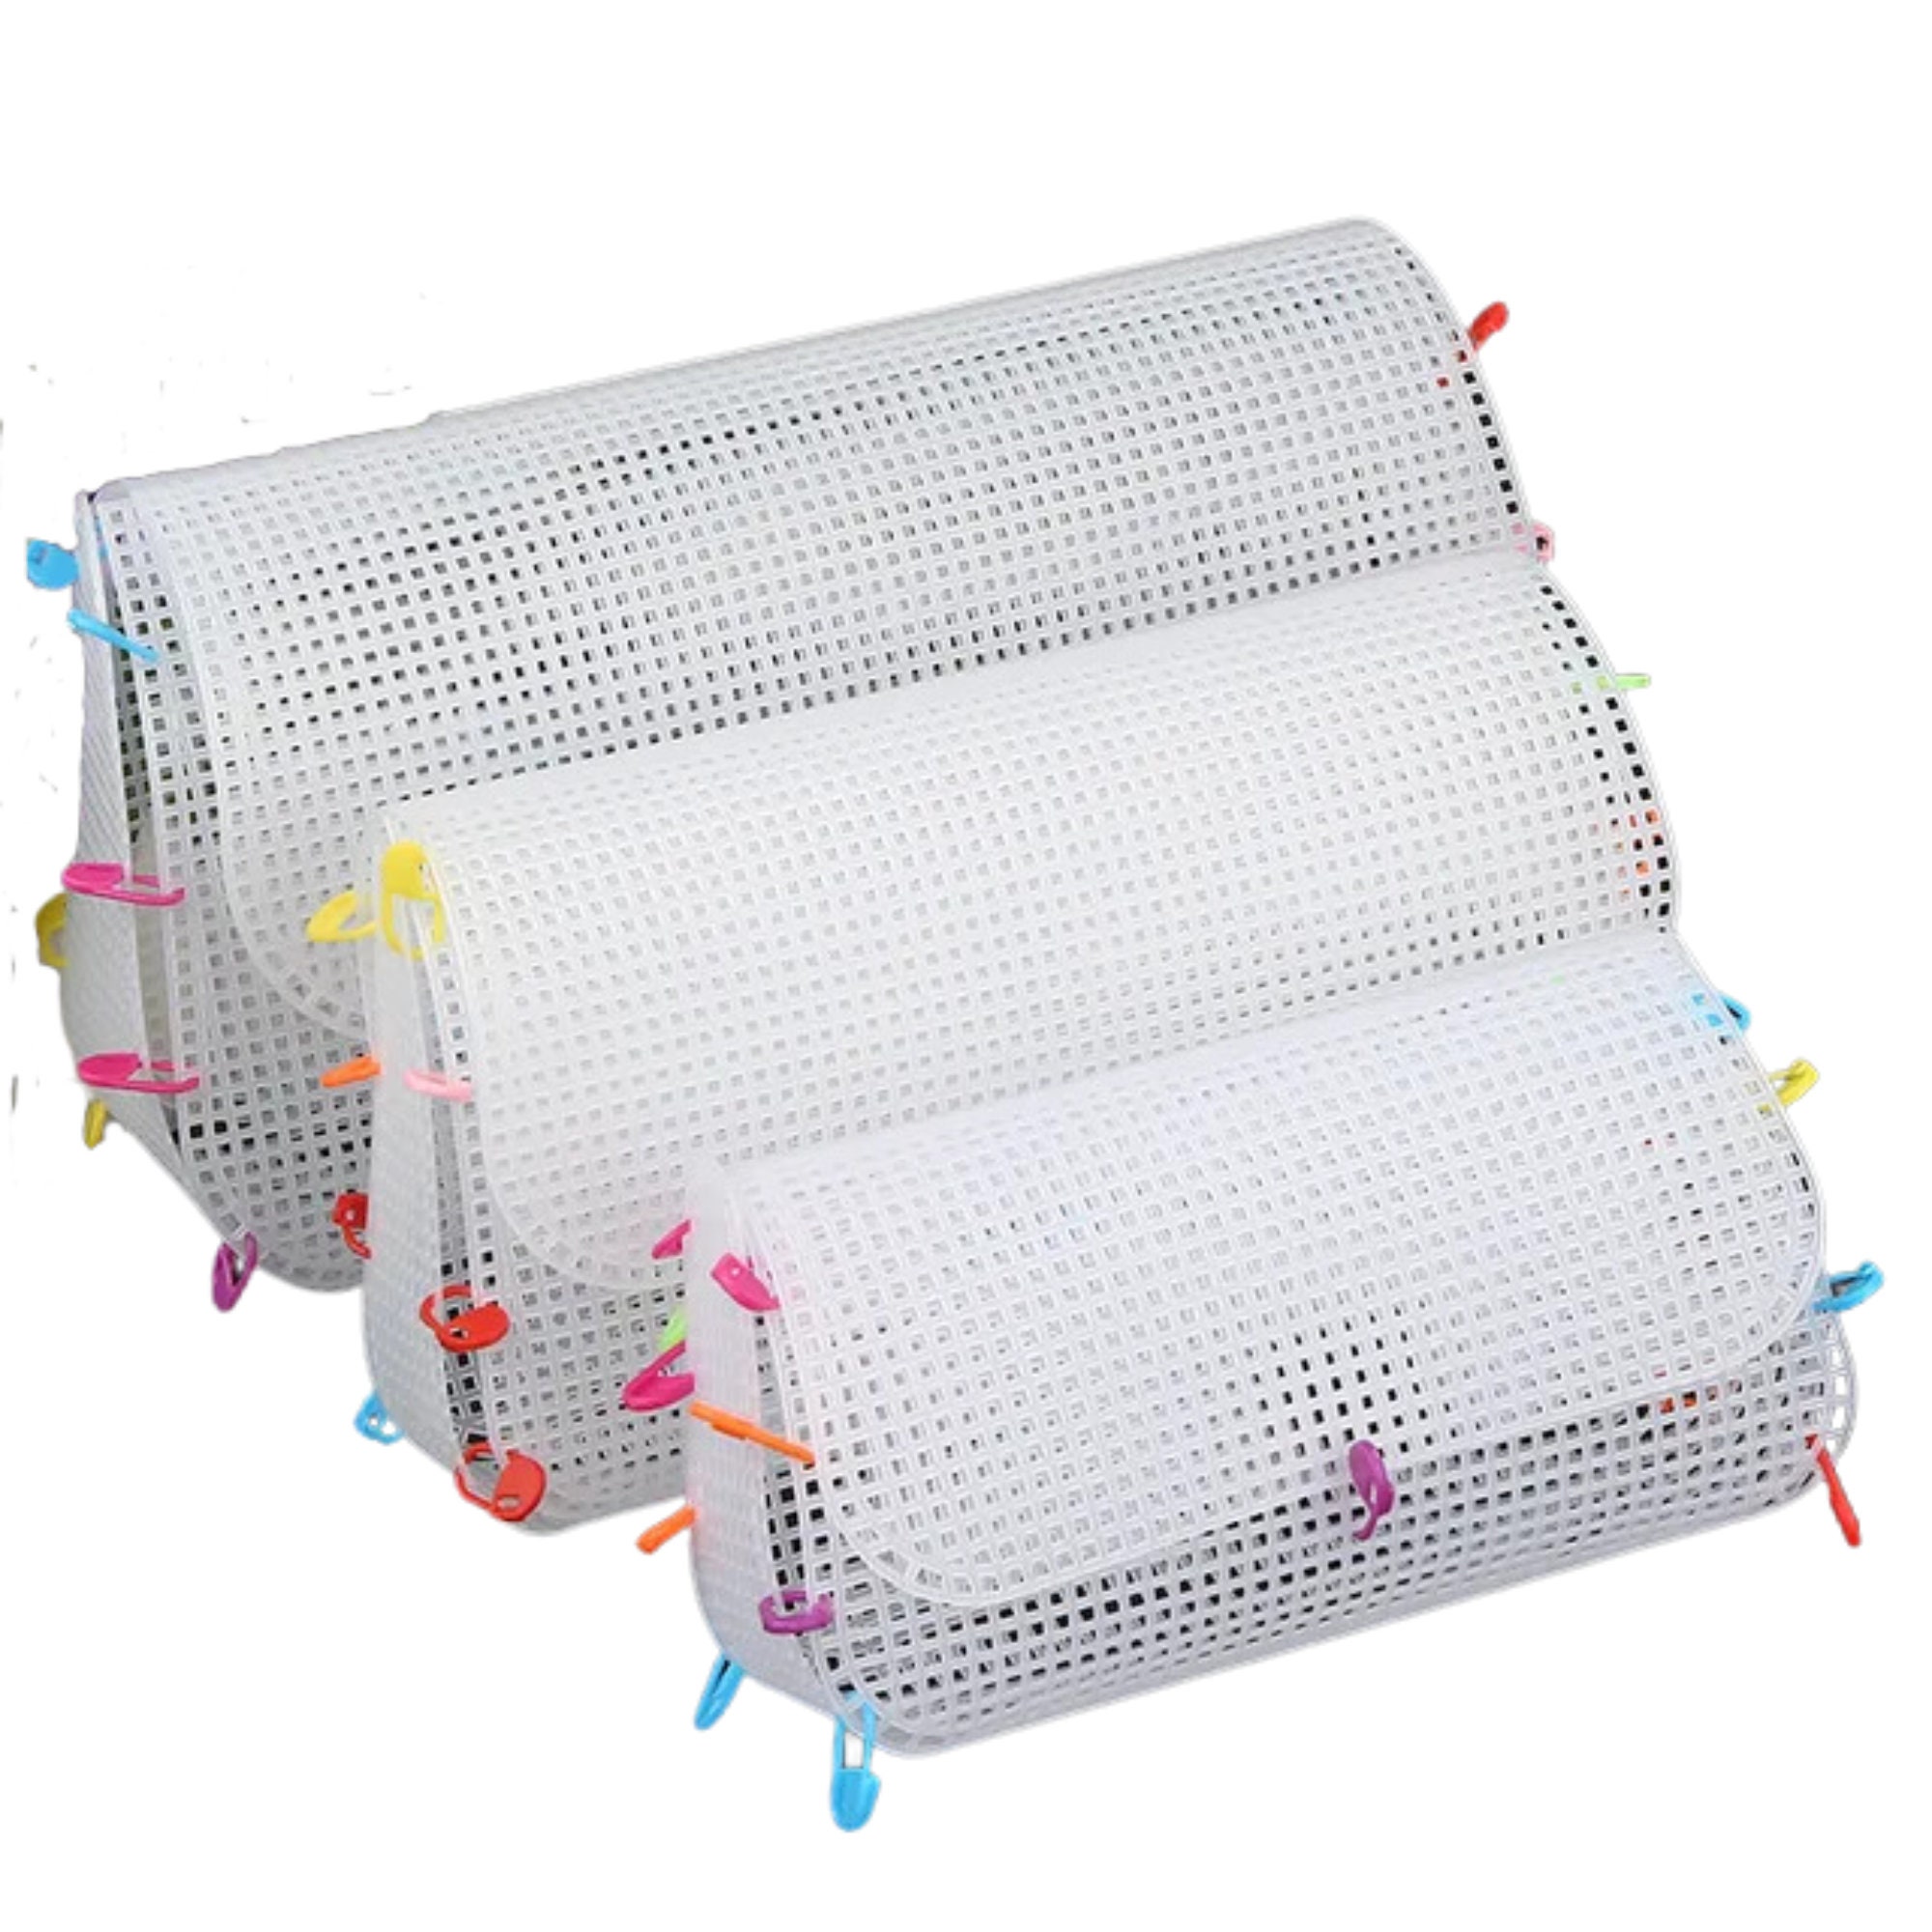 Buy Clear Mesh Pouch - Large 10.25 x 13.5 Online